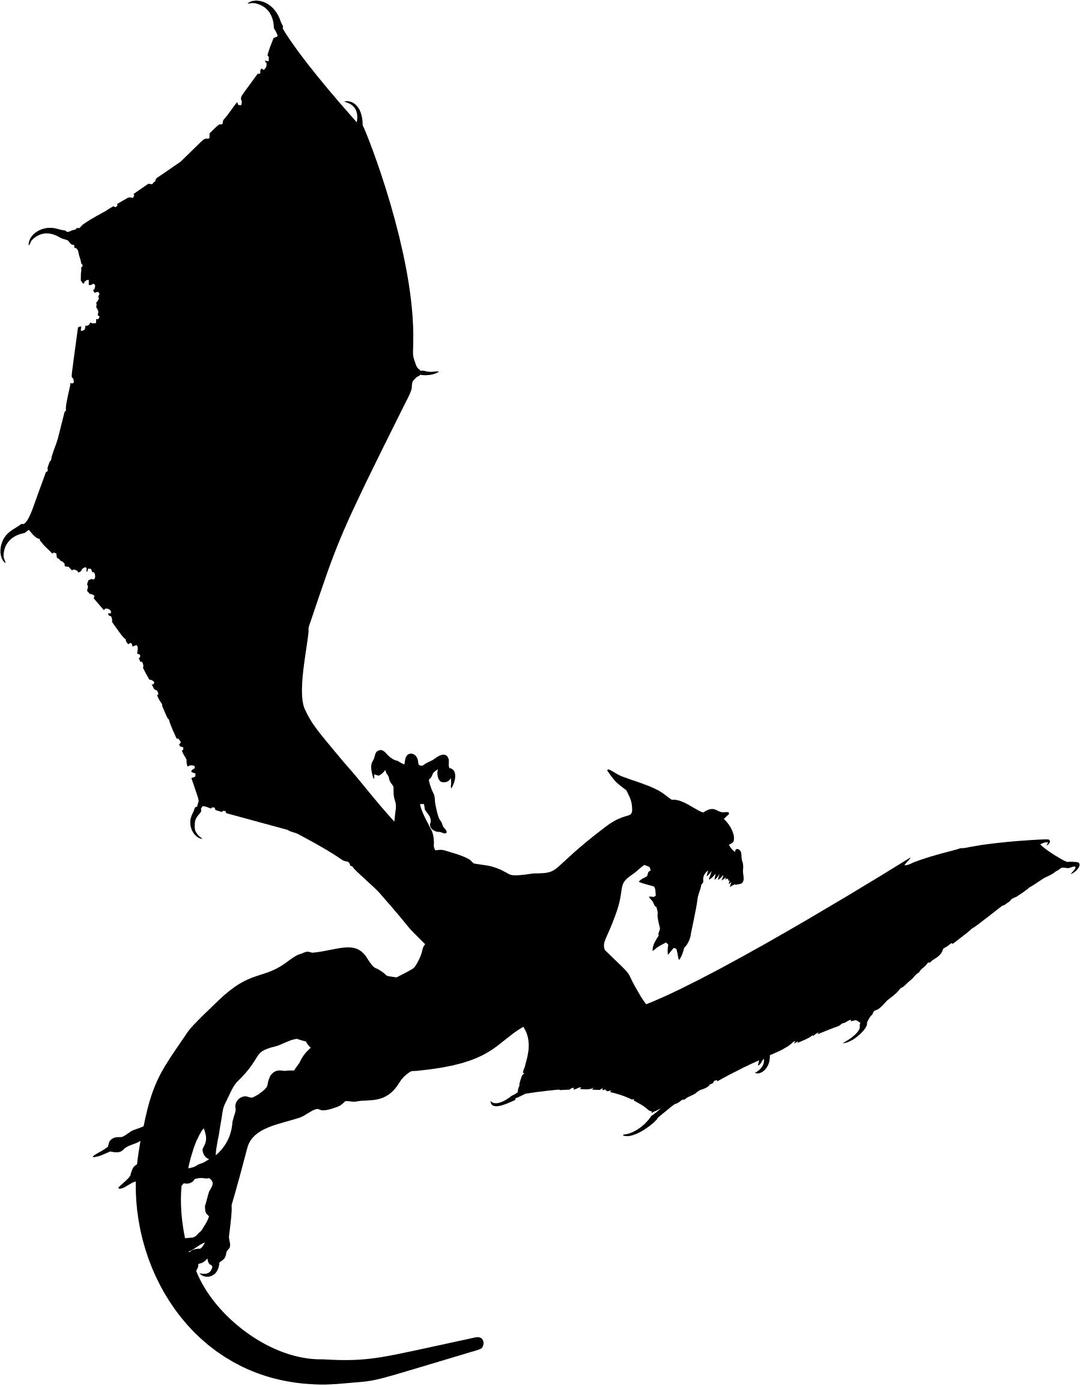 Dragon Attacking Silhouette png transparent